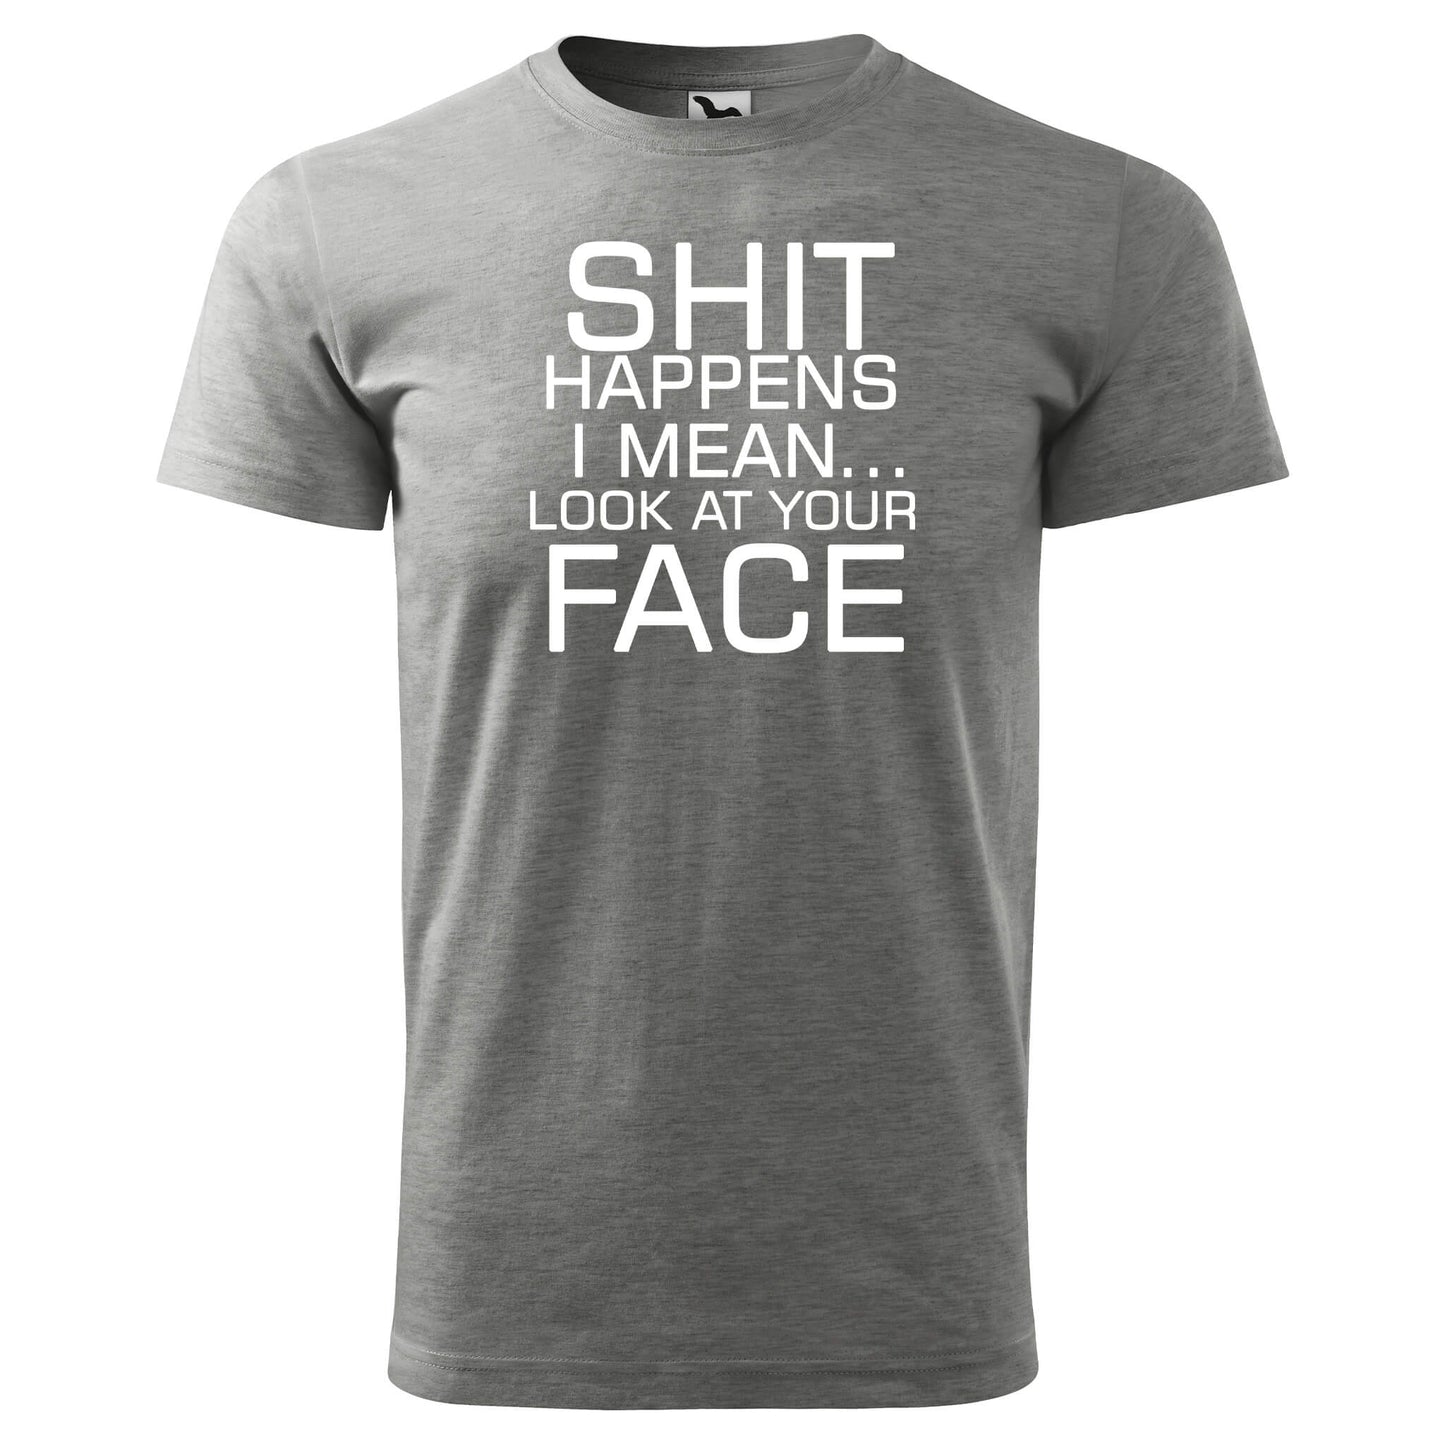 T-shirt - Shit happens, I mean look at your face - rvdesignprint